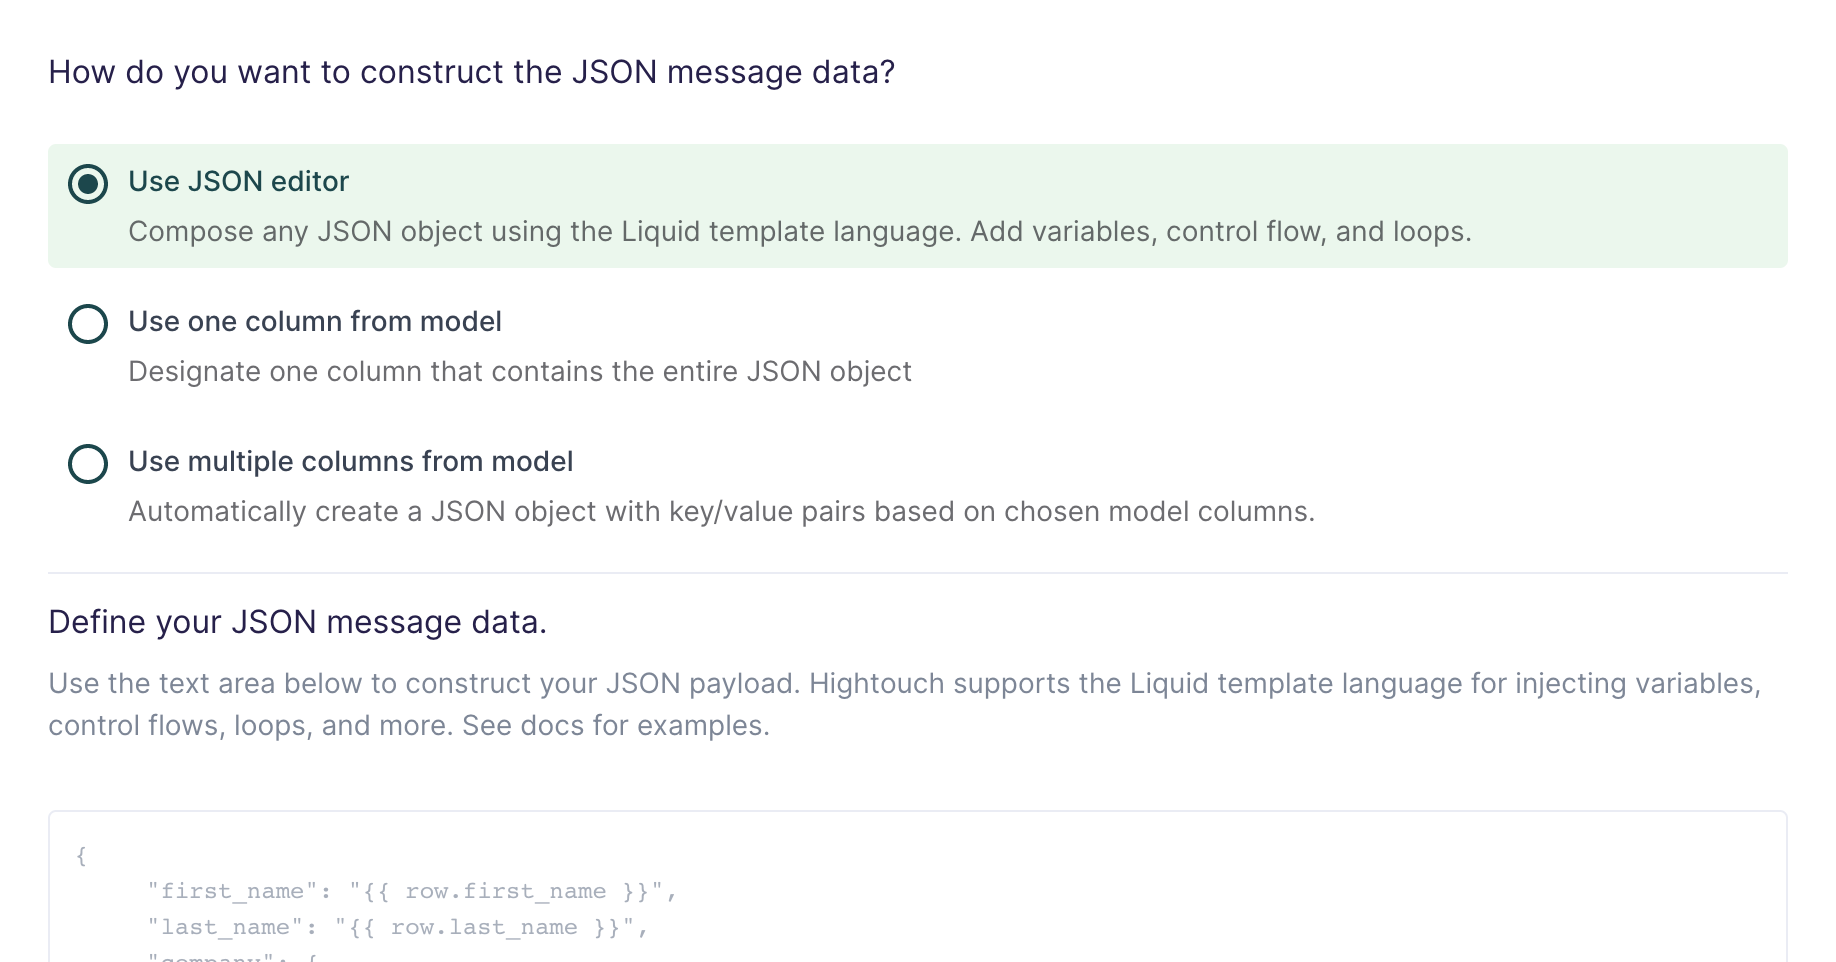 Selecting the JSON editor method in the Hightouch UI